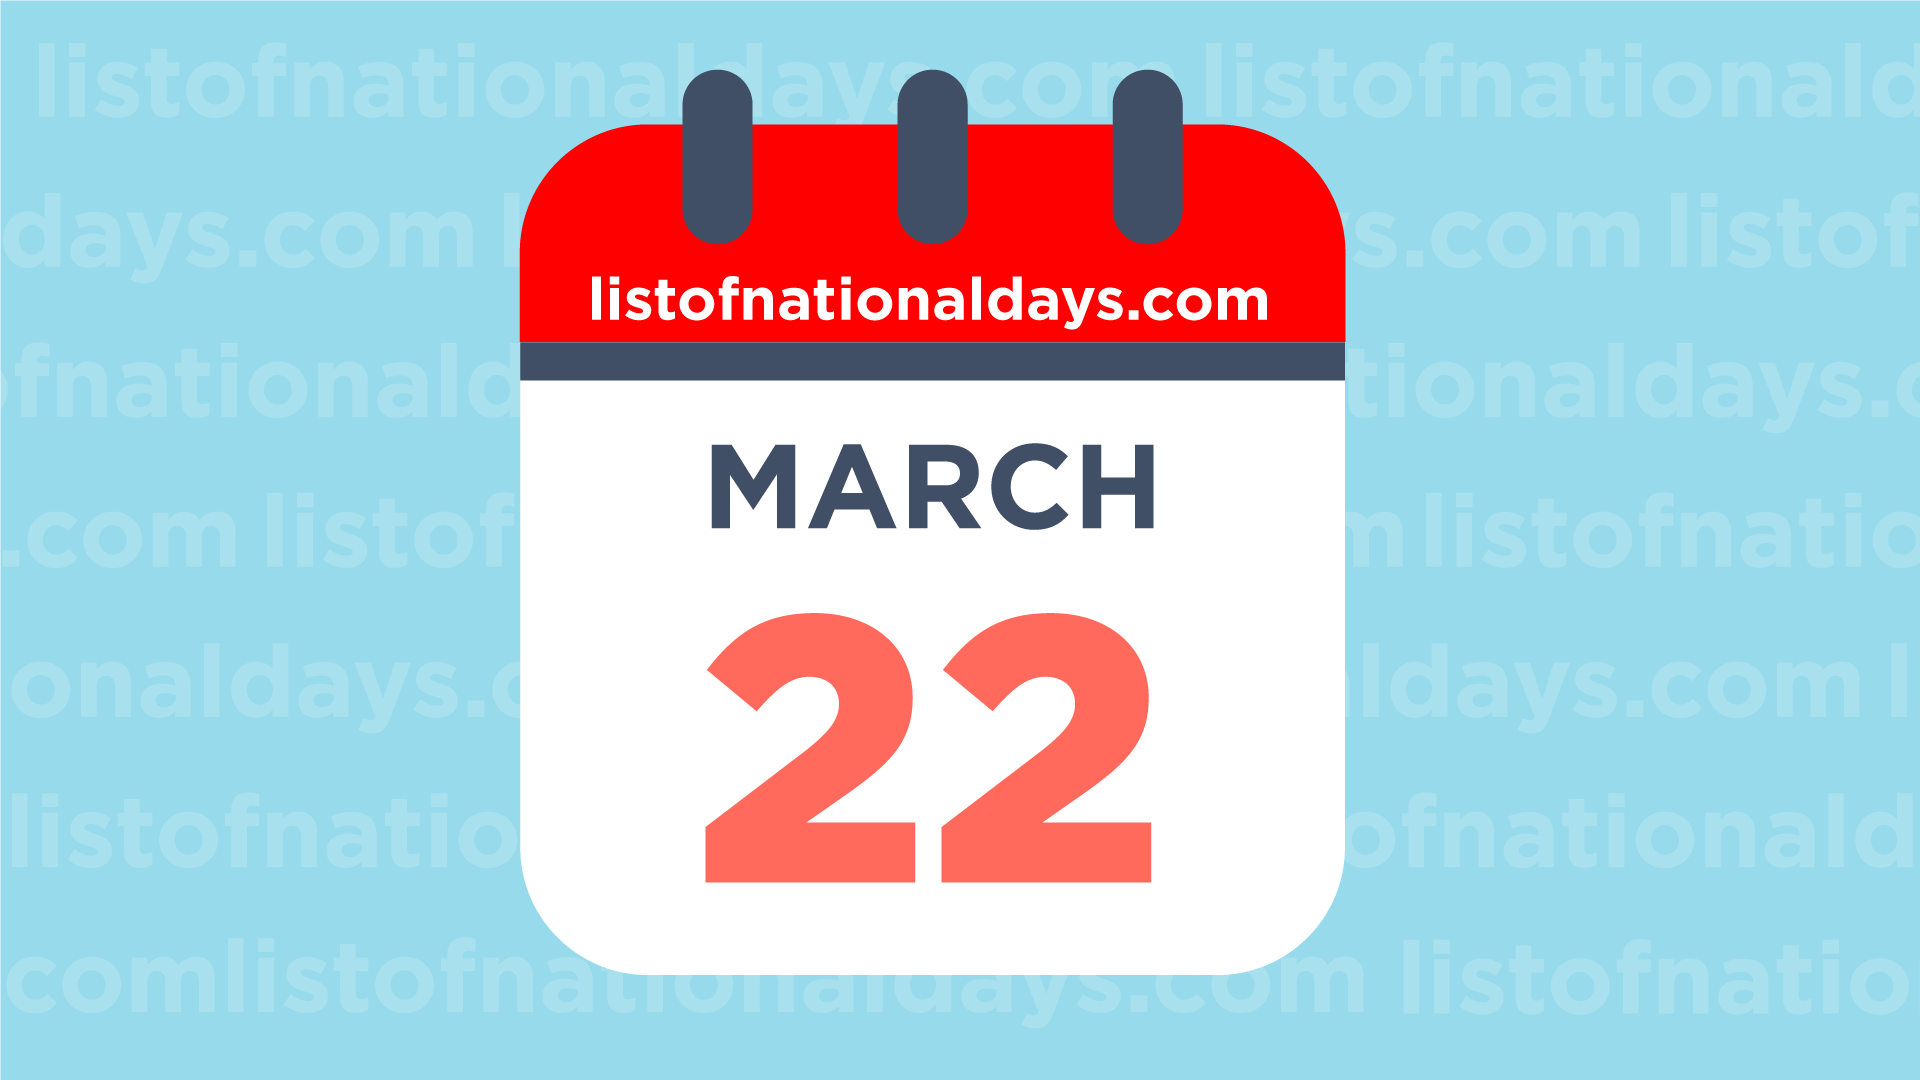 MARCH 22ND: National Holidays Observances Famous Birthdays